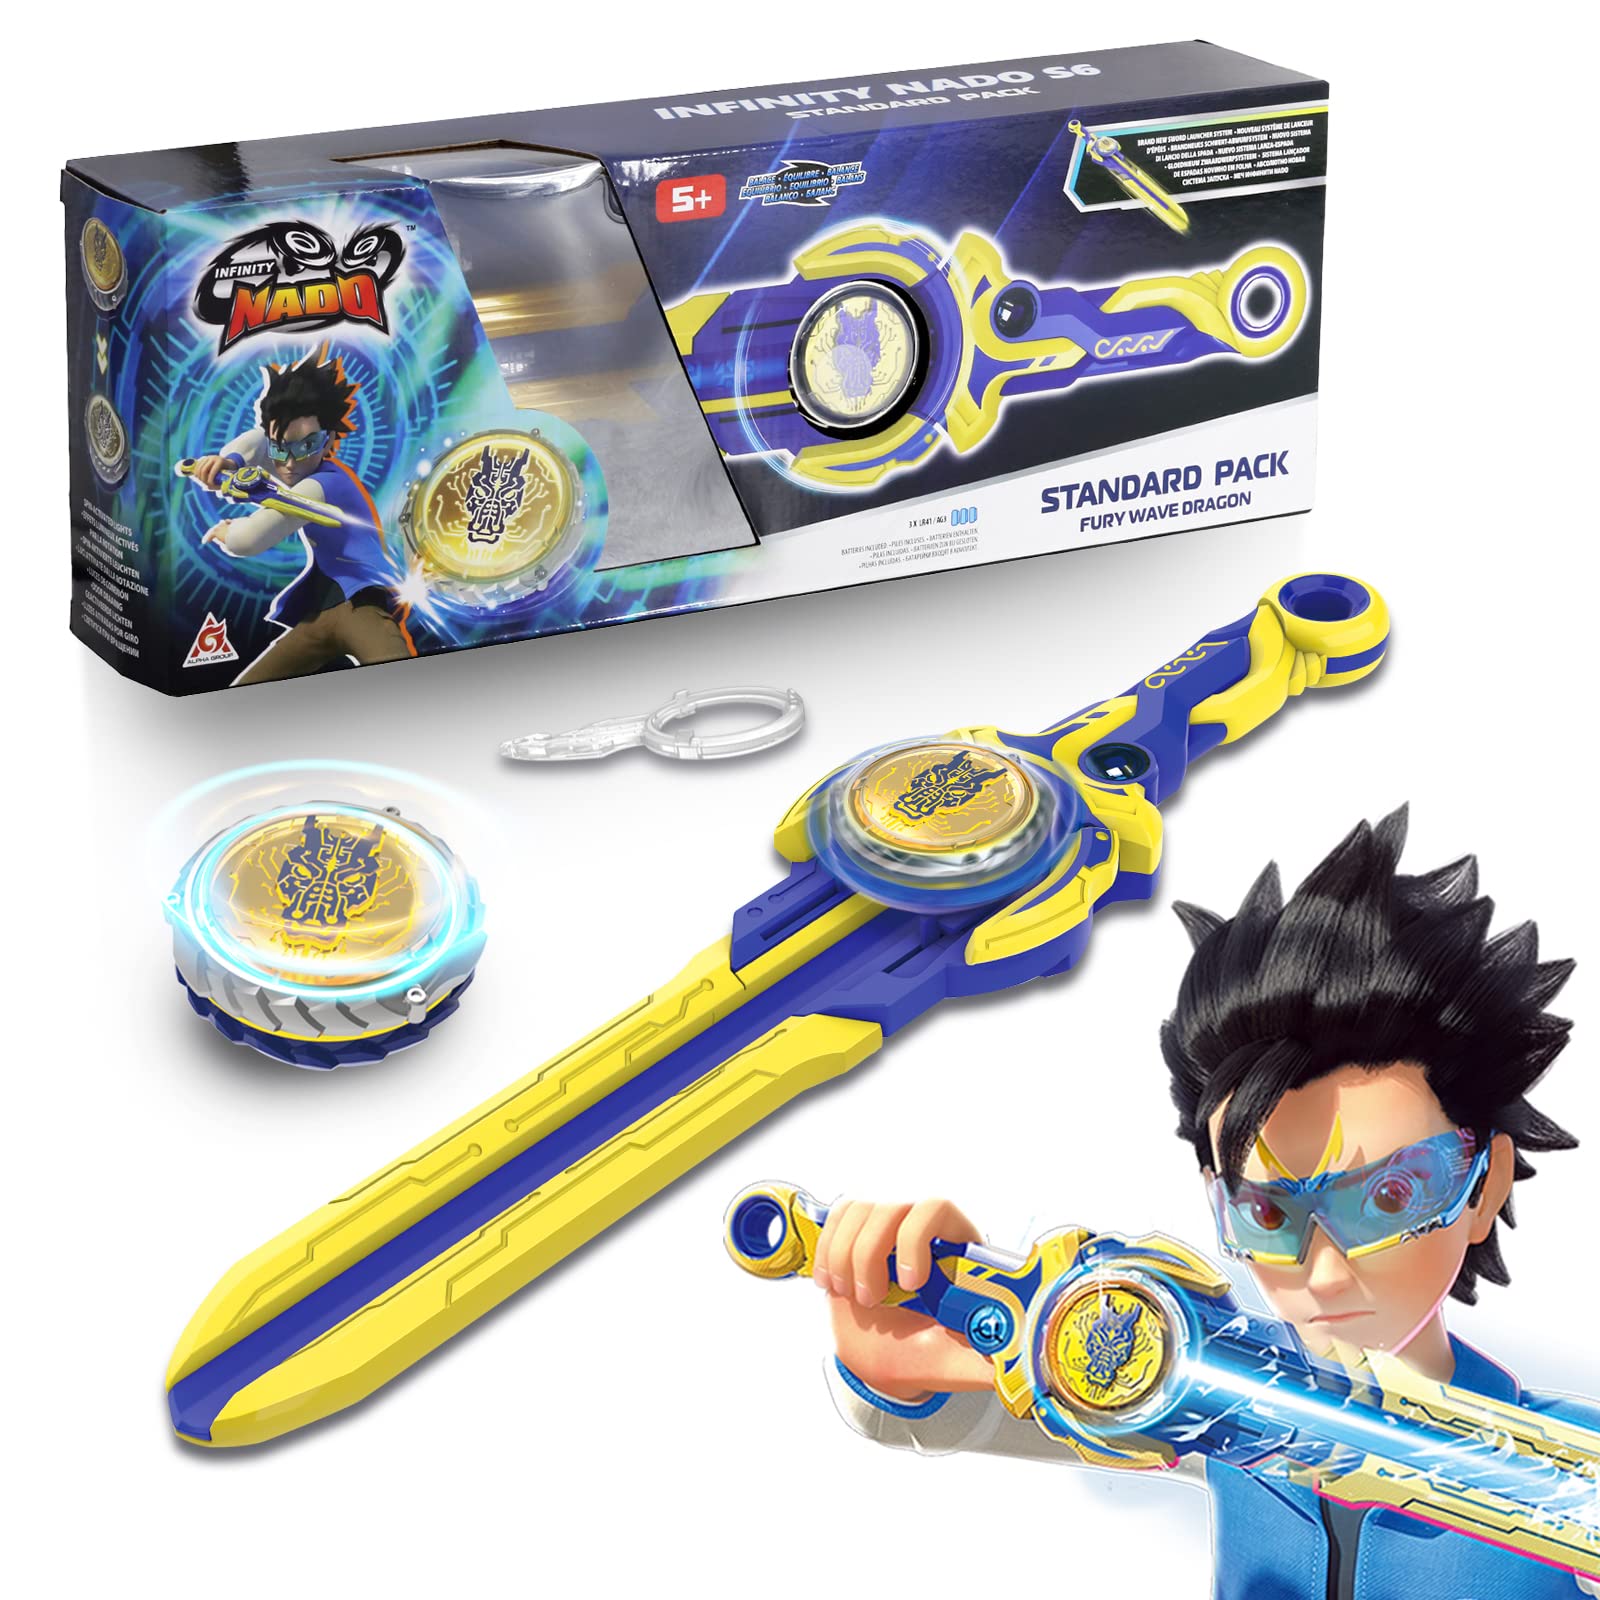 Infinity Nado Battling Top Burst Gyro Toy, Spinning Top w/Sword Launcher, Battle Game Set Toys for 5 6 7 8 9 10 Years Old Boys Girls, Gifts for Boys Girls Kids - Fury Wave Dragon